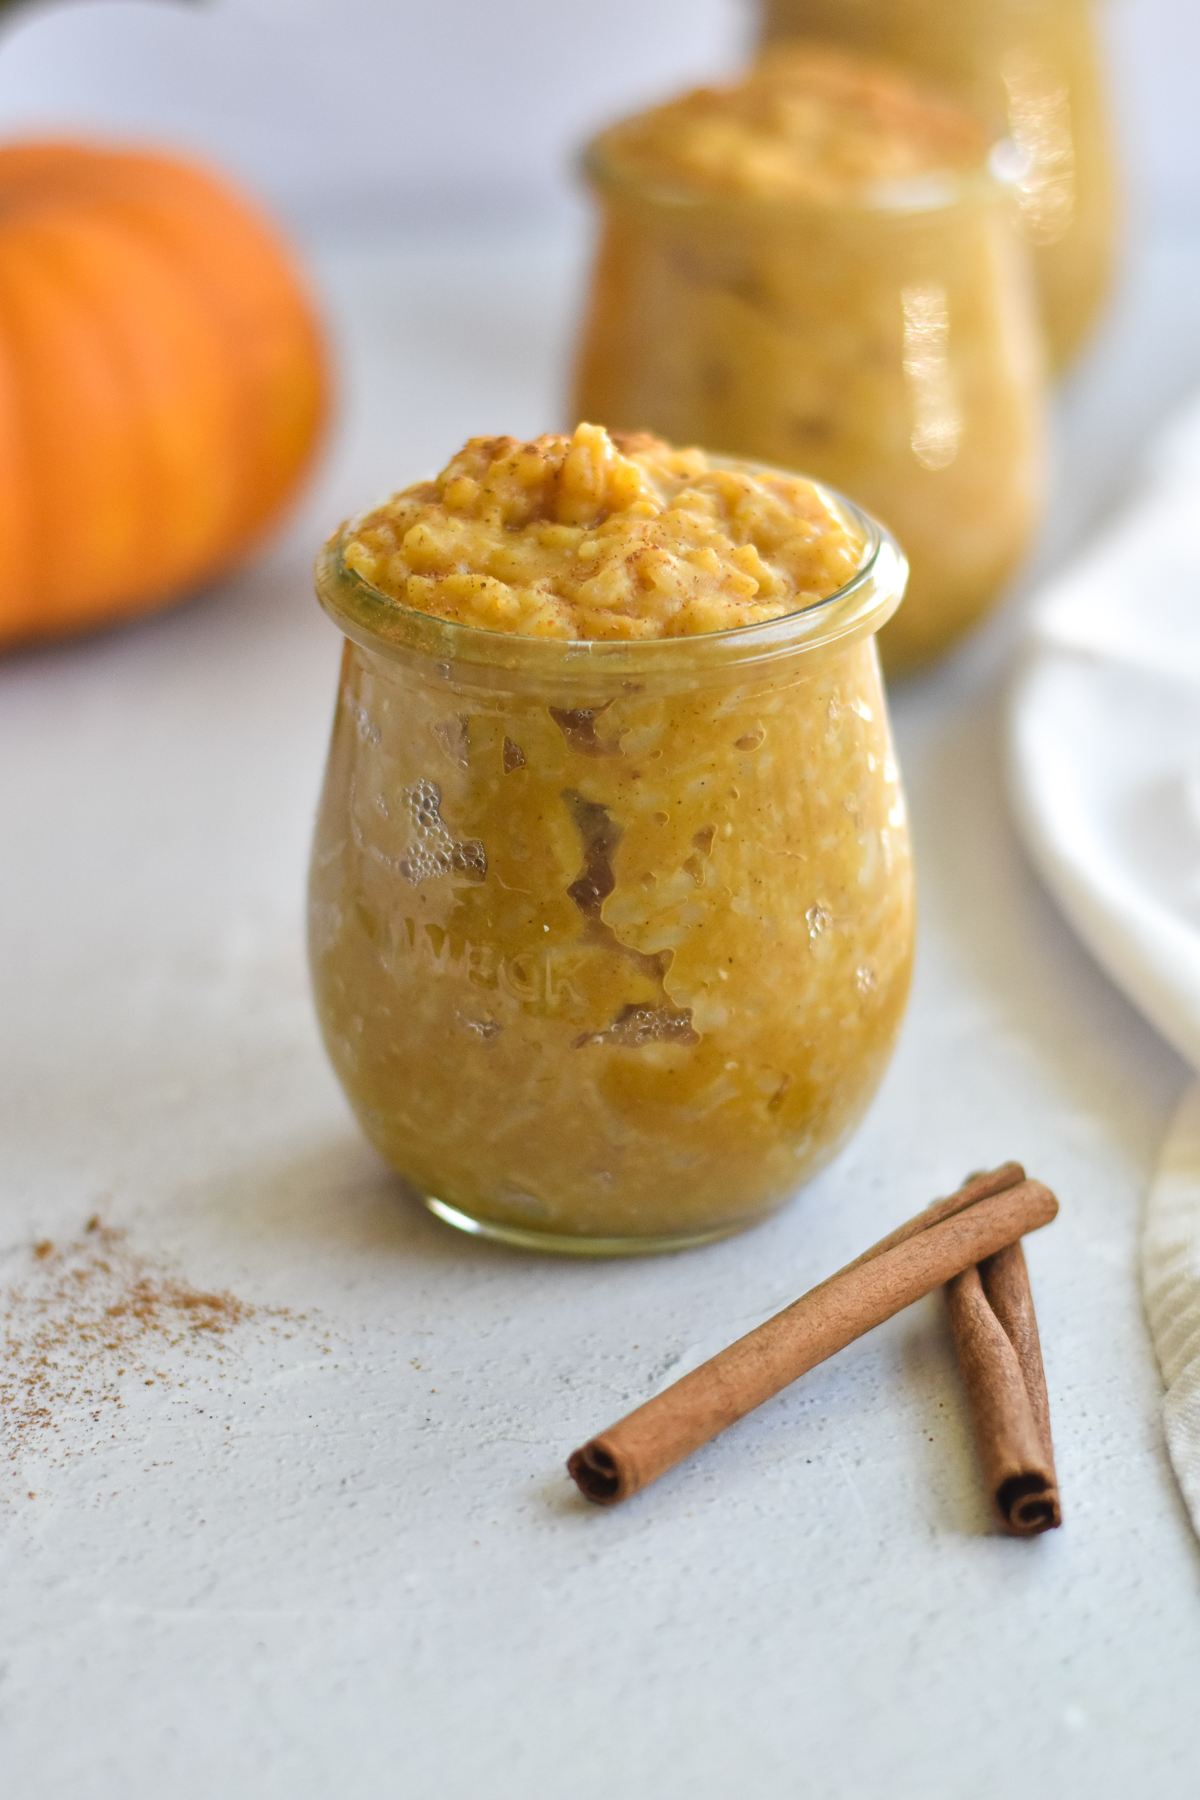 A fall spin on the traditional arroz con leche: pumpkin creates a creamy pumpkin spice rice pudding option that is perfect for breakfast or dessert.